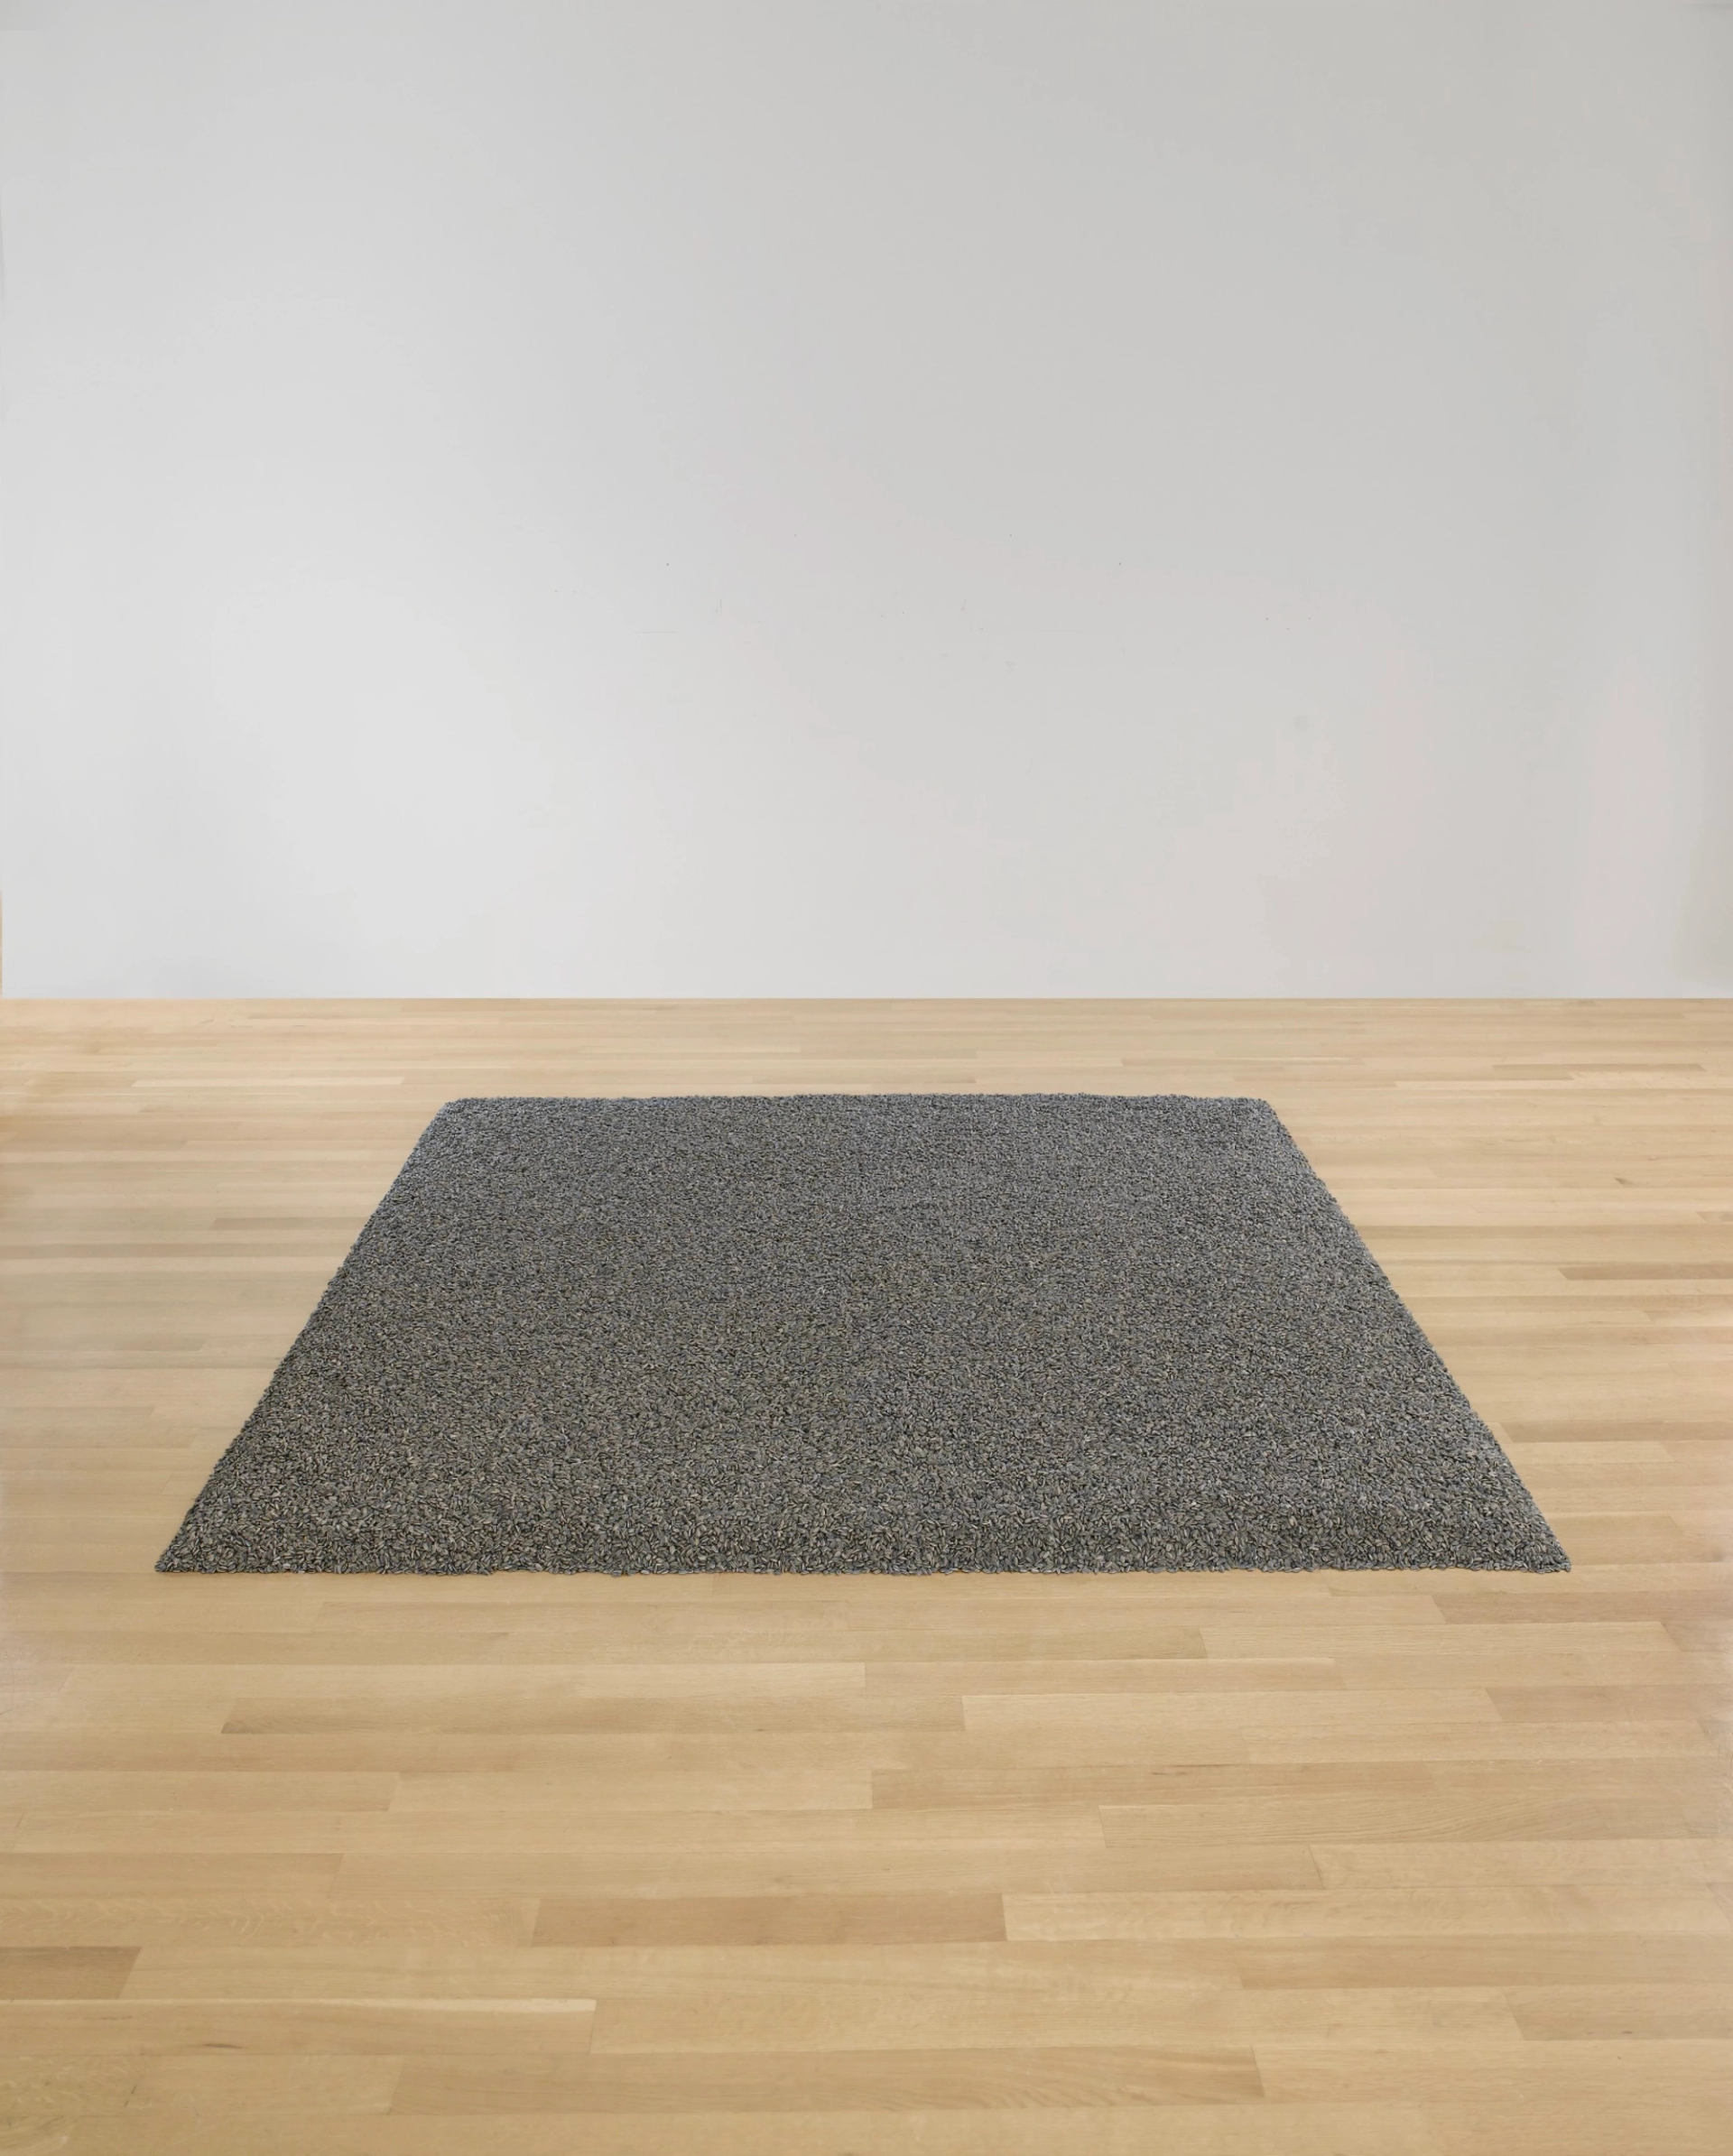 A rectangular arrangement of thousands of tiny porcelain sunflower seeds meticulously spread out on an empty gallery floor.